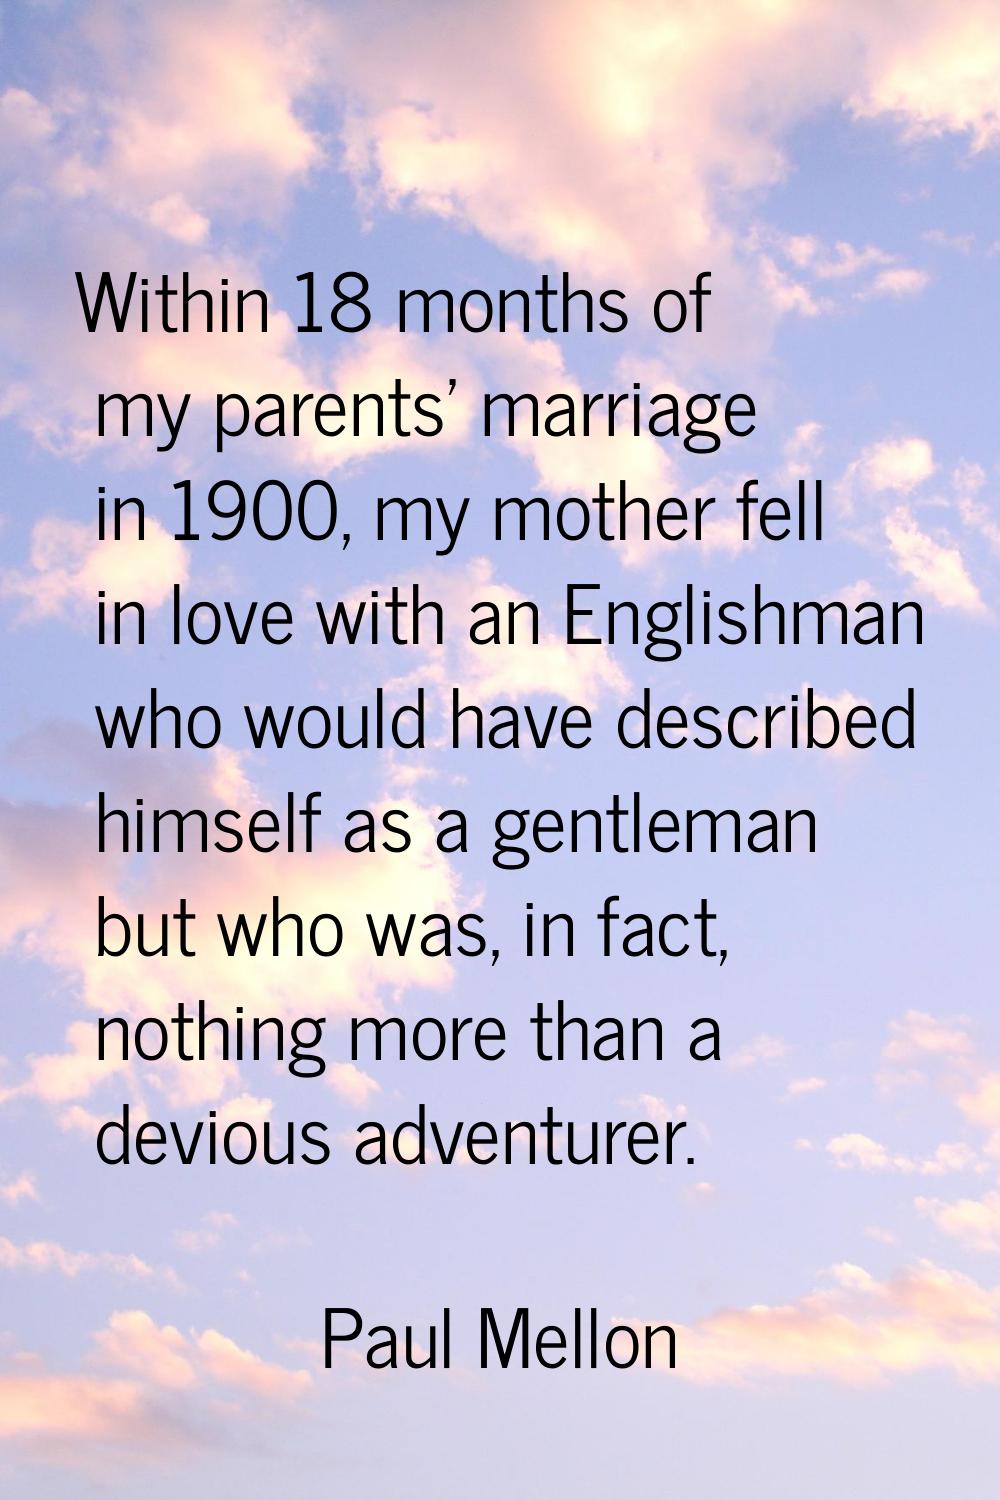 Within 18 months of my parents' marriage in 1900, my mother fell in love with an Englishman who wou